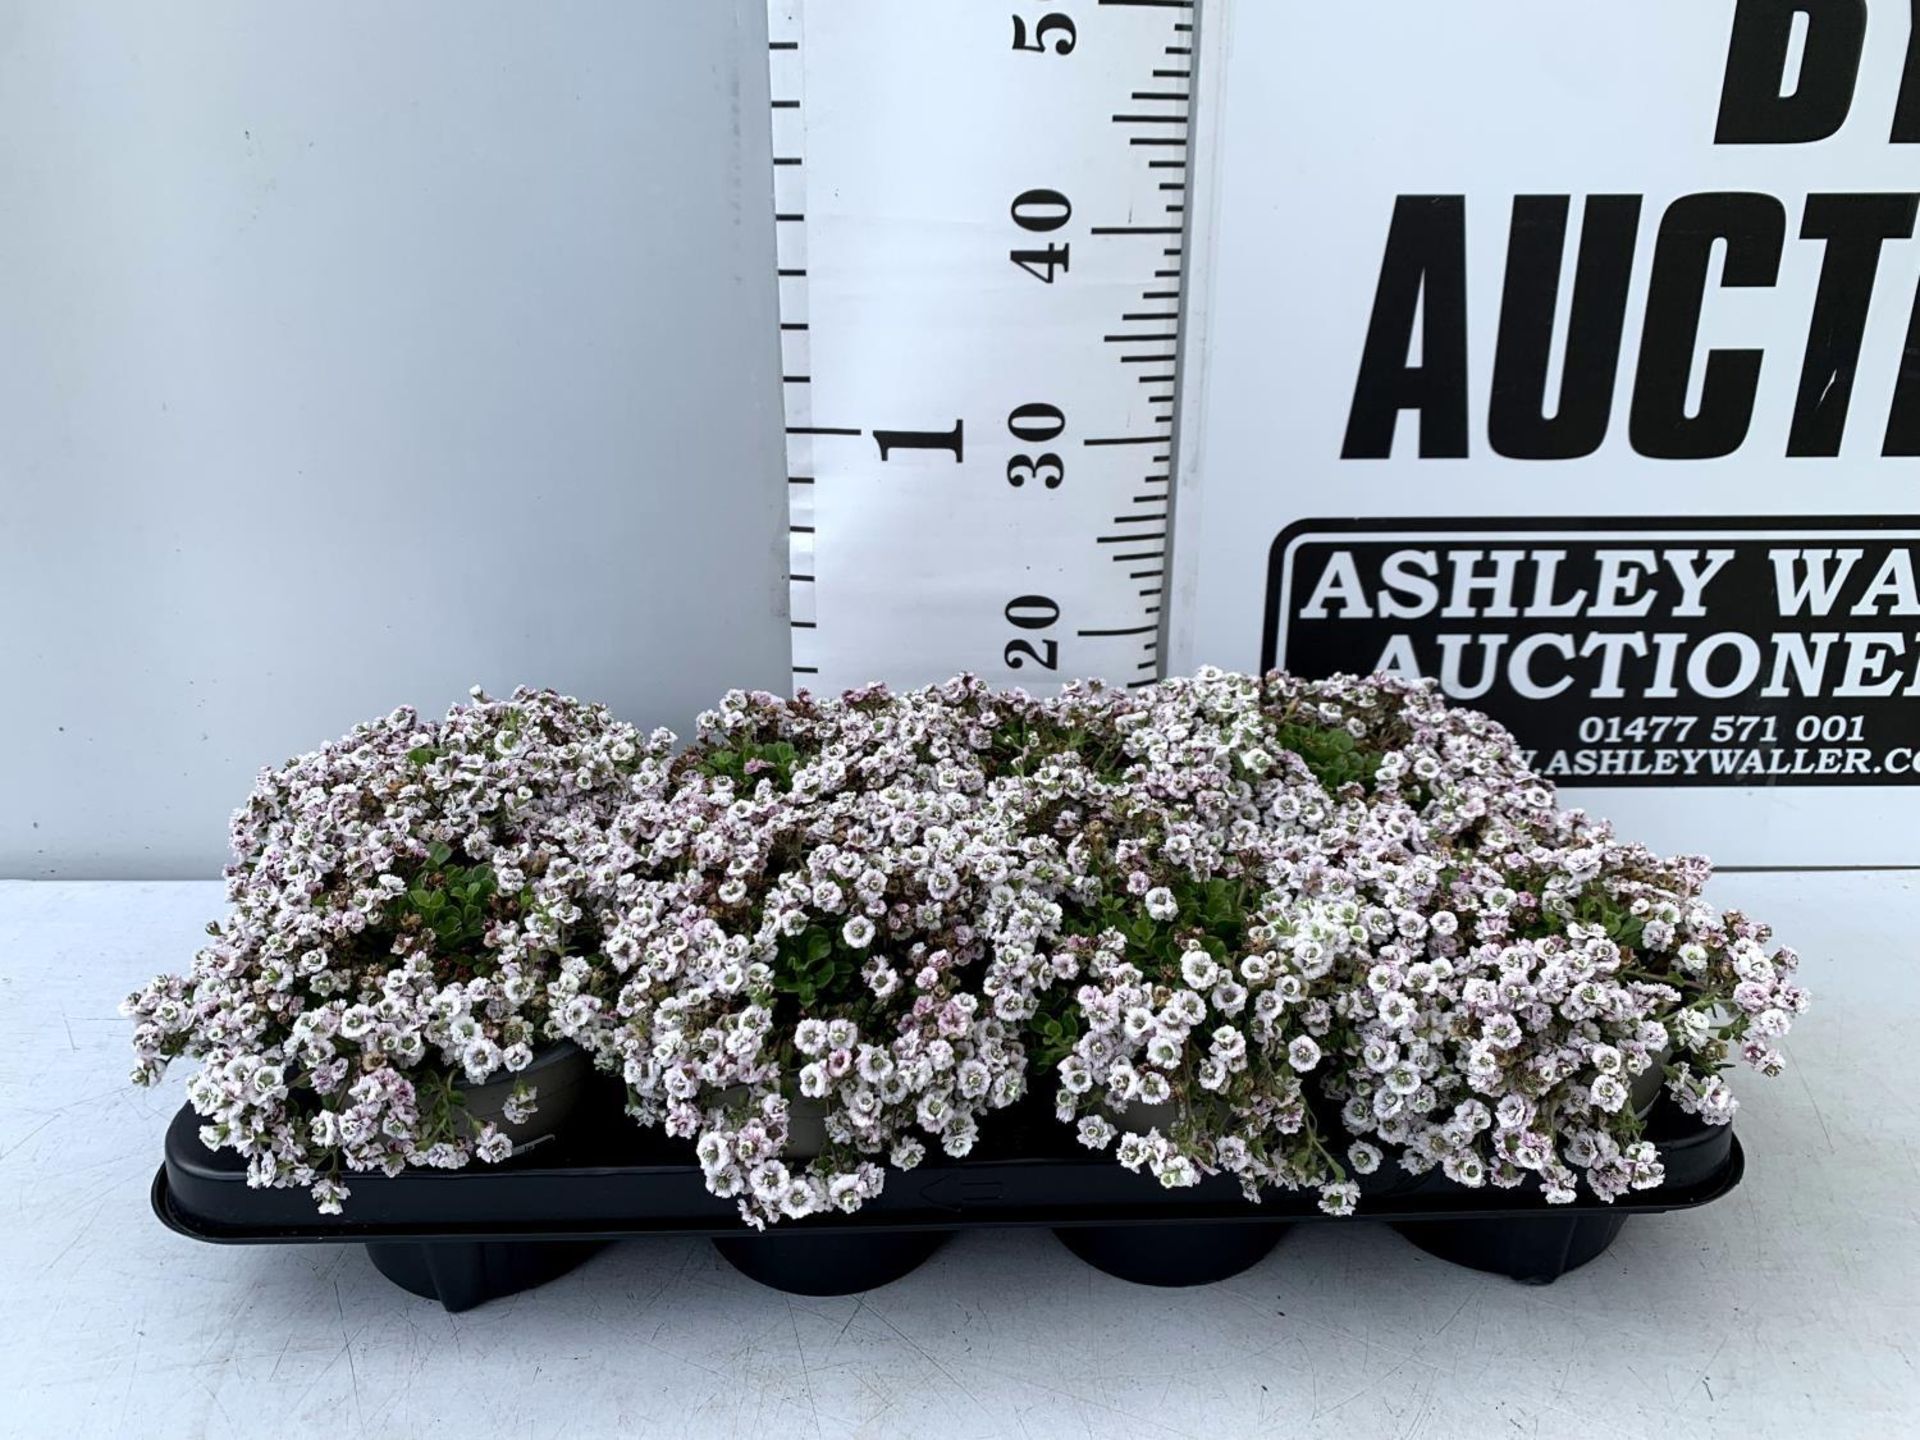 EIGHT GYPSOPHILA CERASTIOIDES PLENA WHITE IN 1 LTR POTS APPROX 20CM IN HEIGHT PLUS VAT TO BE SOLD - Image 2 of 8